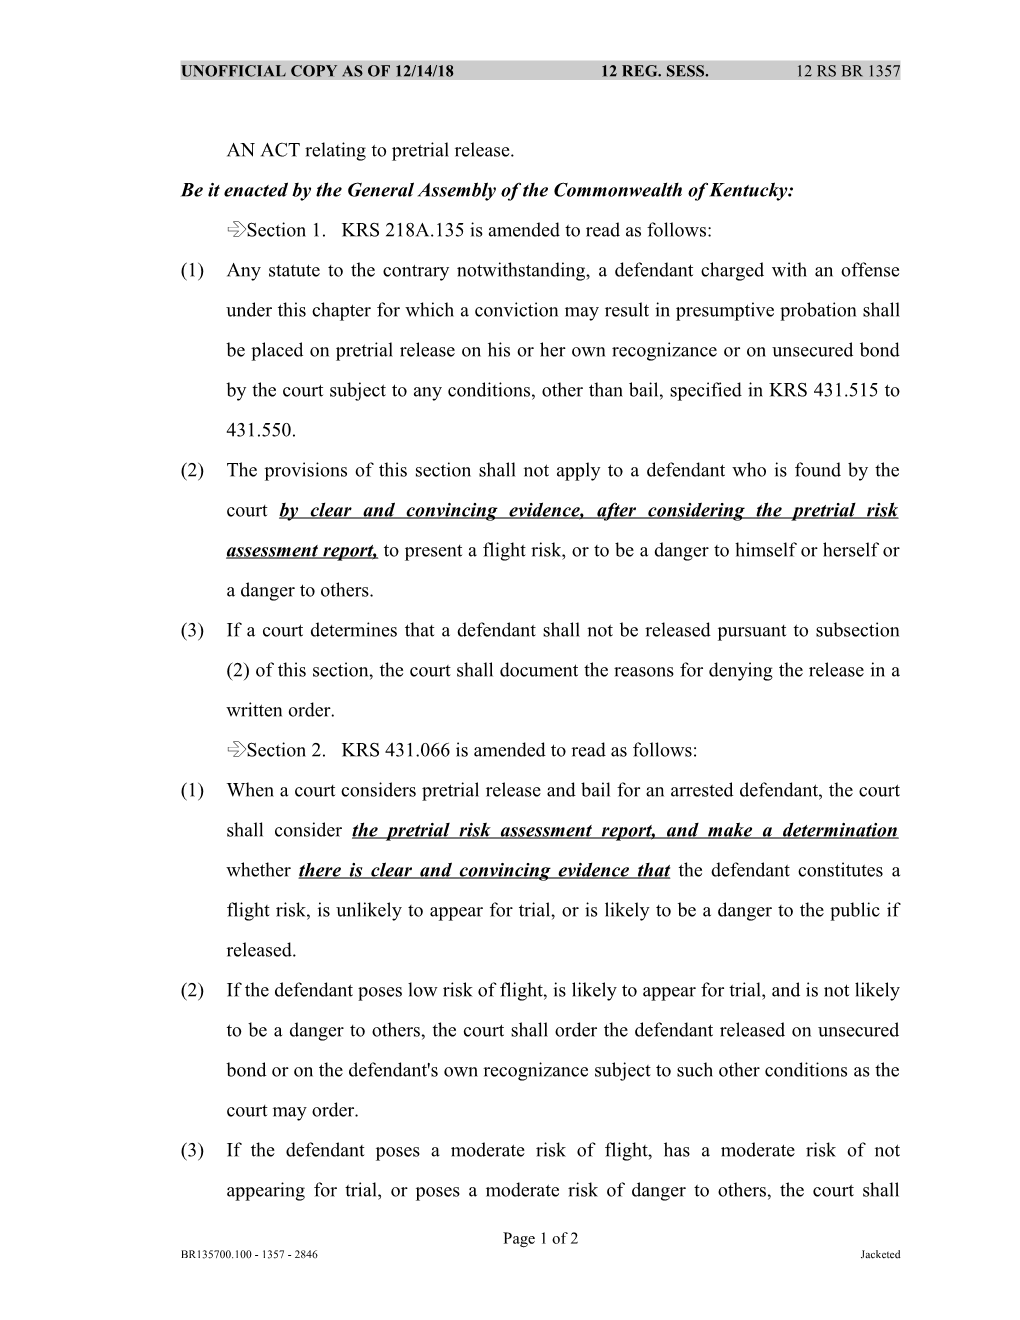 AN ACT Relating to Pretrial Release